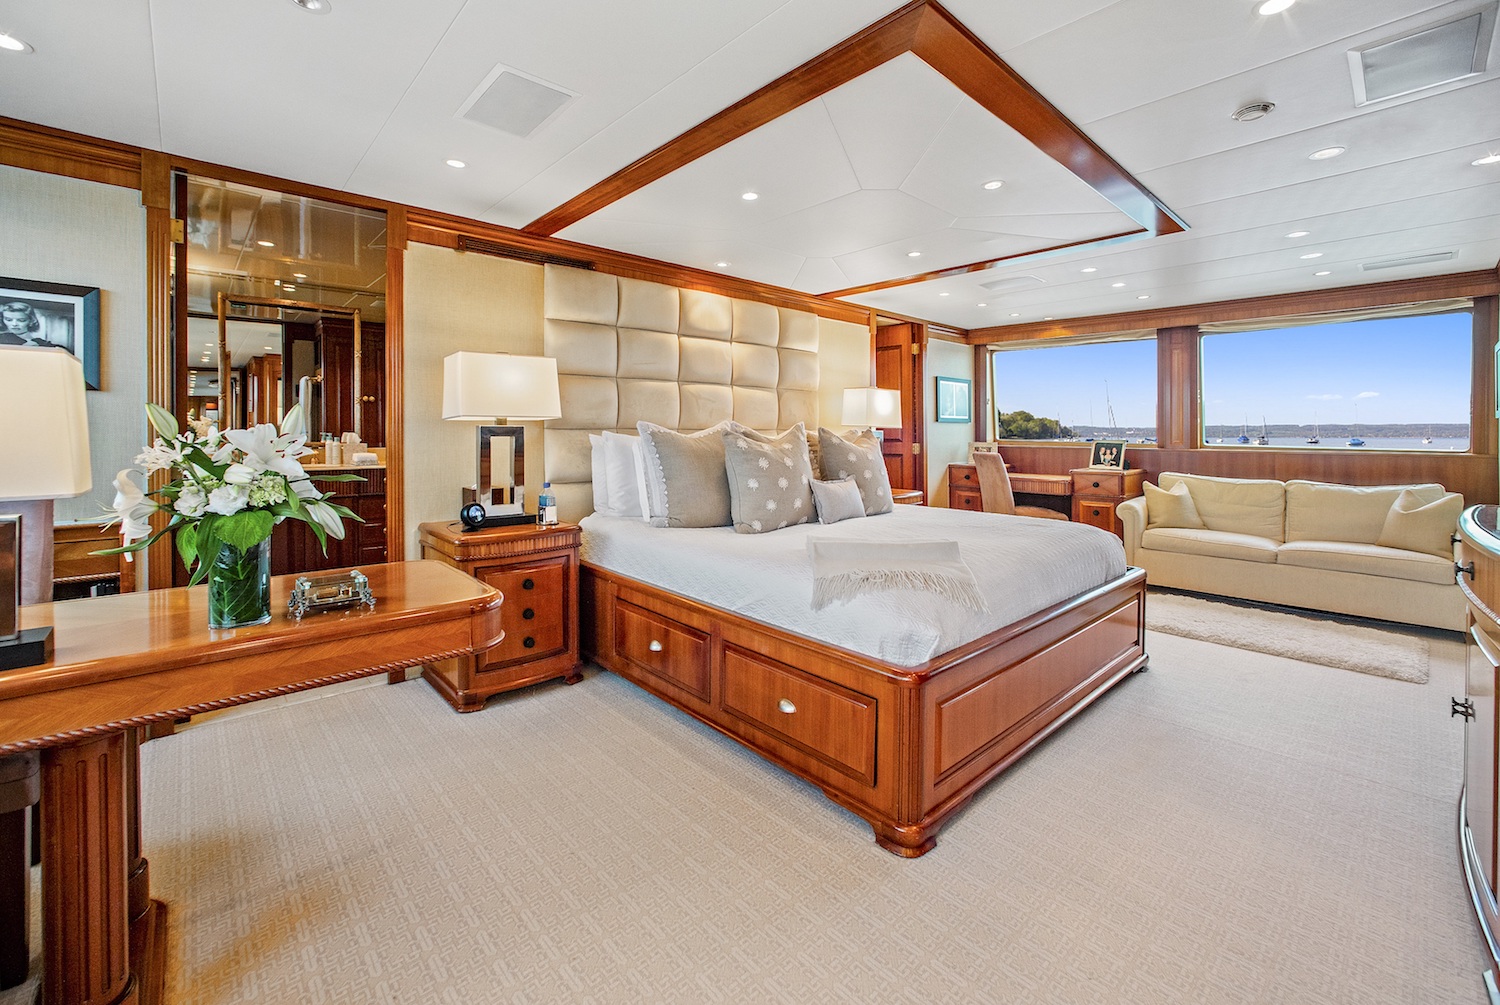 Master Suite With Beautiful Views